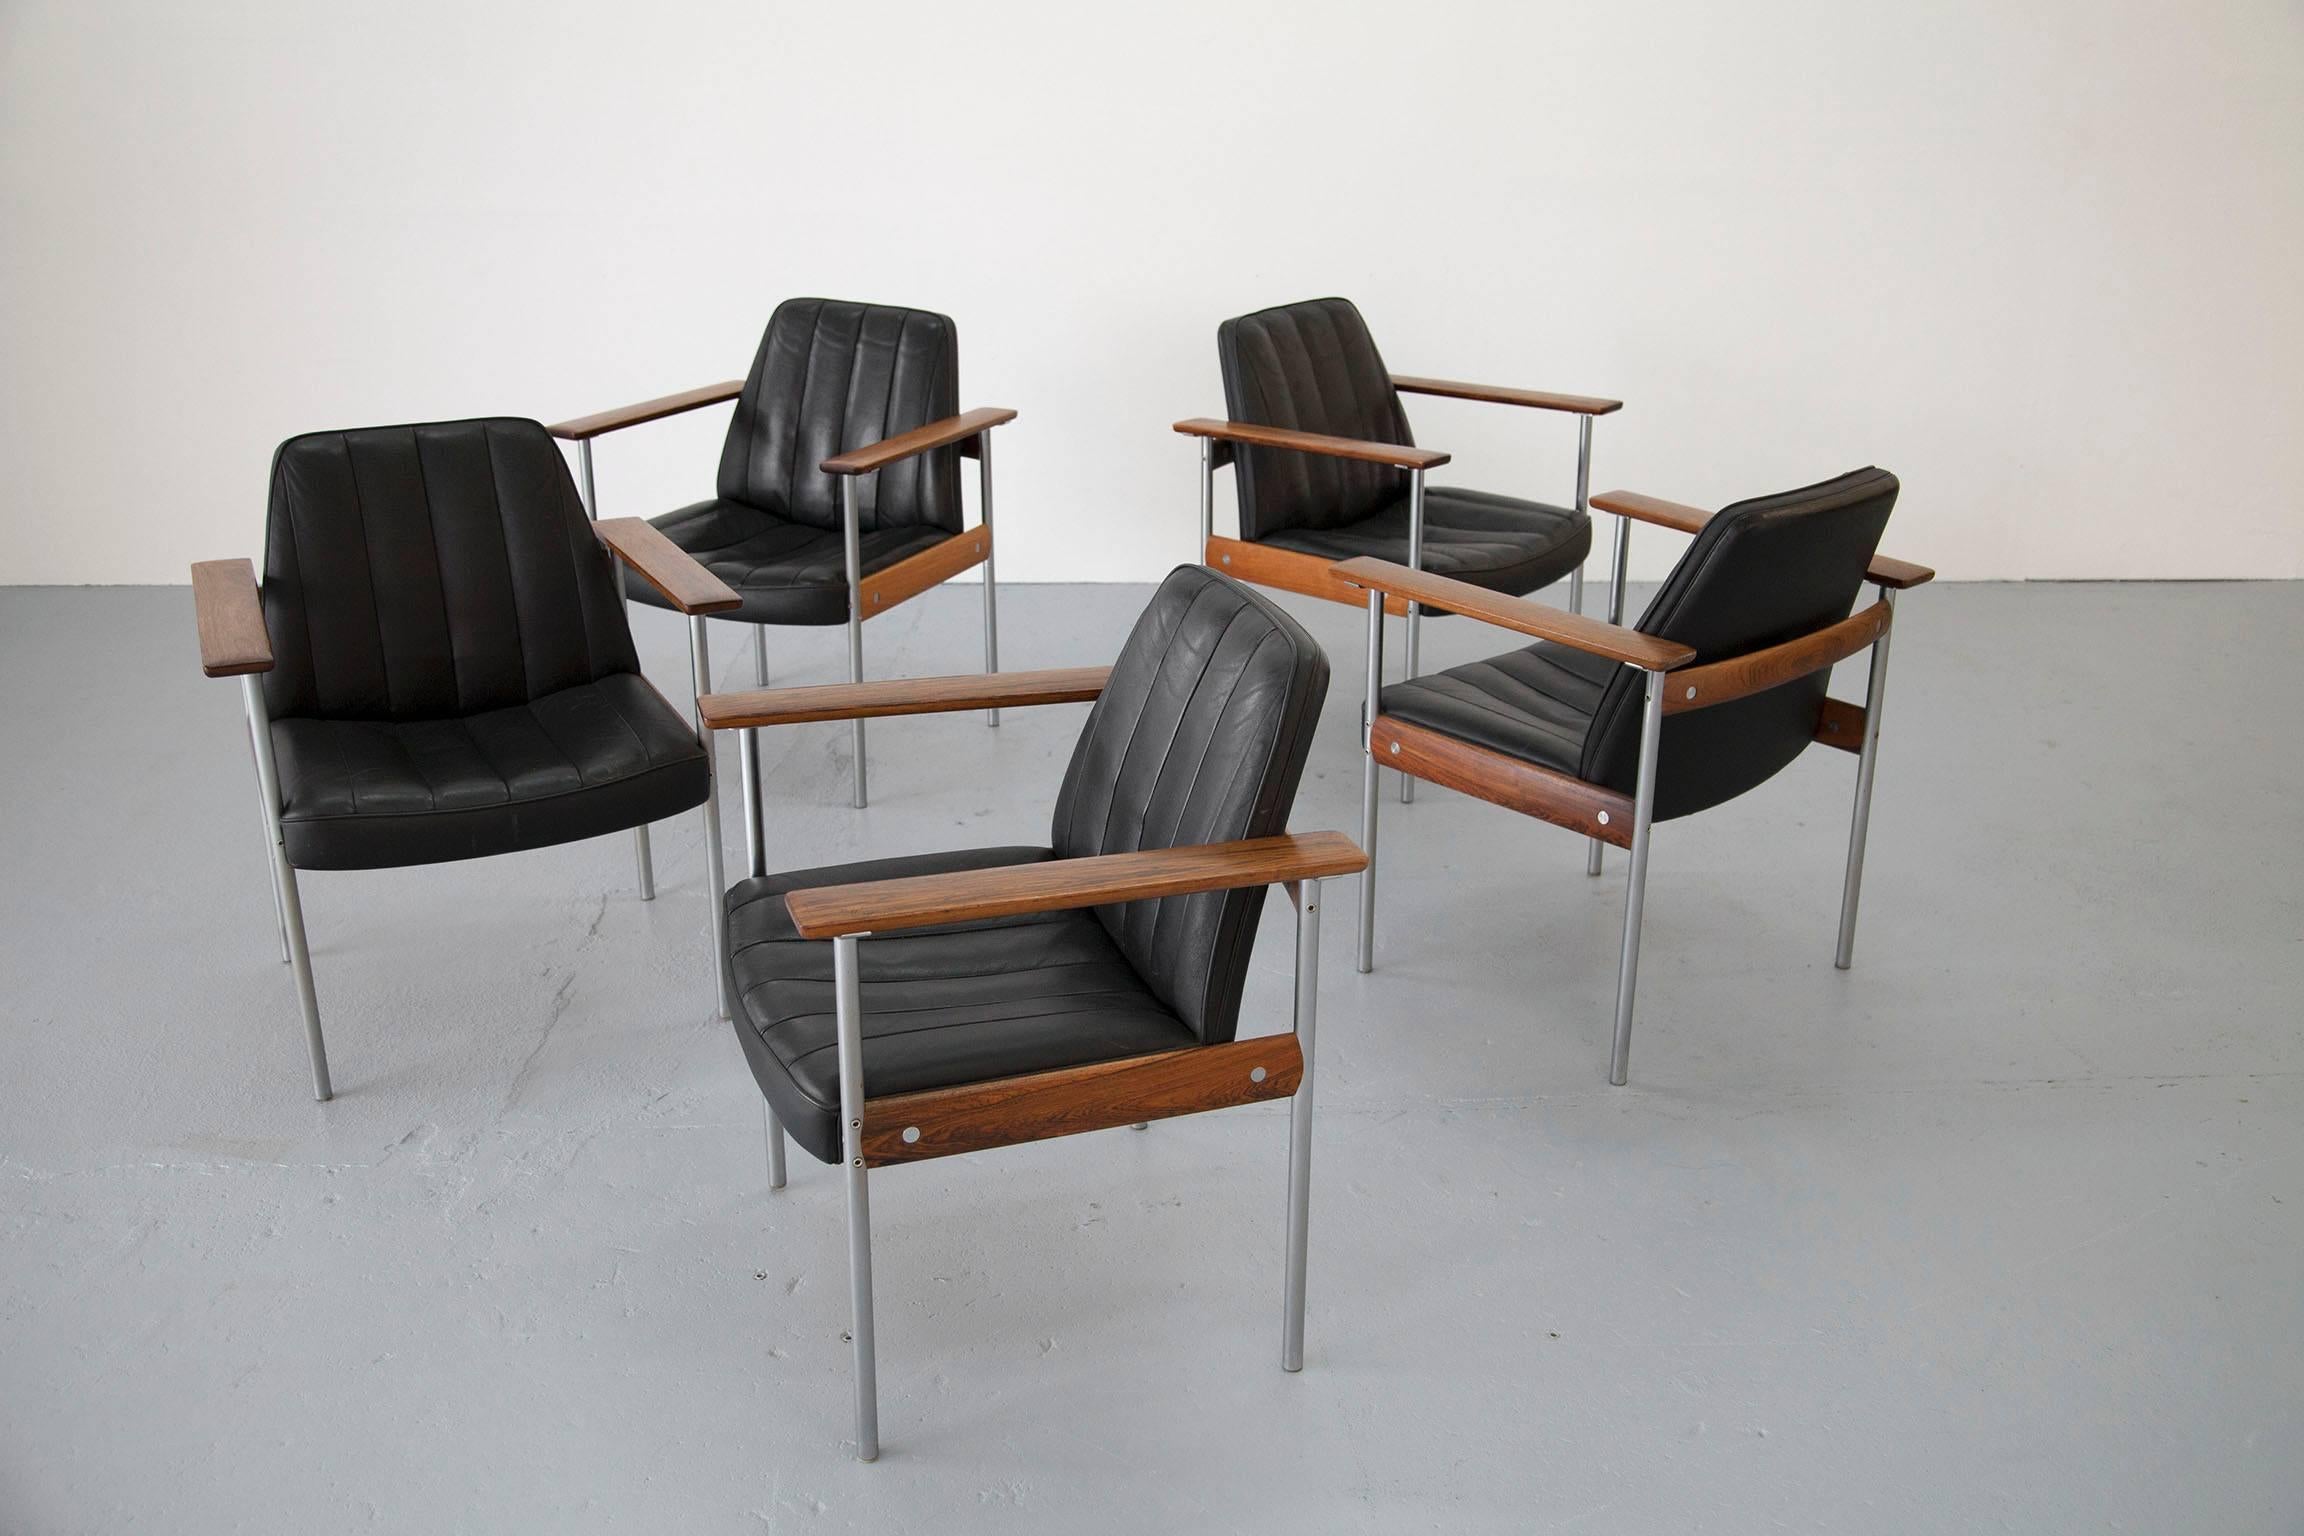 Five Rosewood & Leather Armchairs & Coffee Table by Sven Ivar Dysthe for Dokka 2